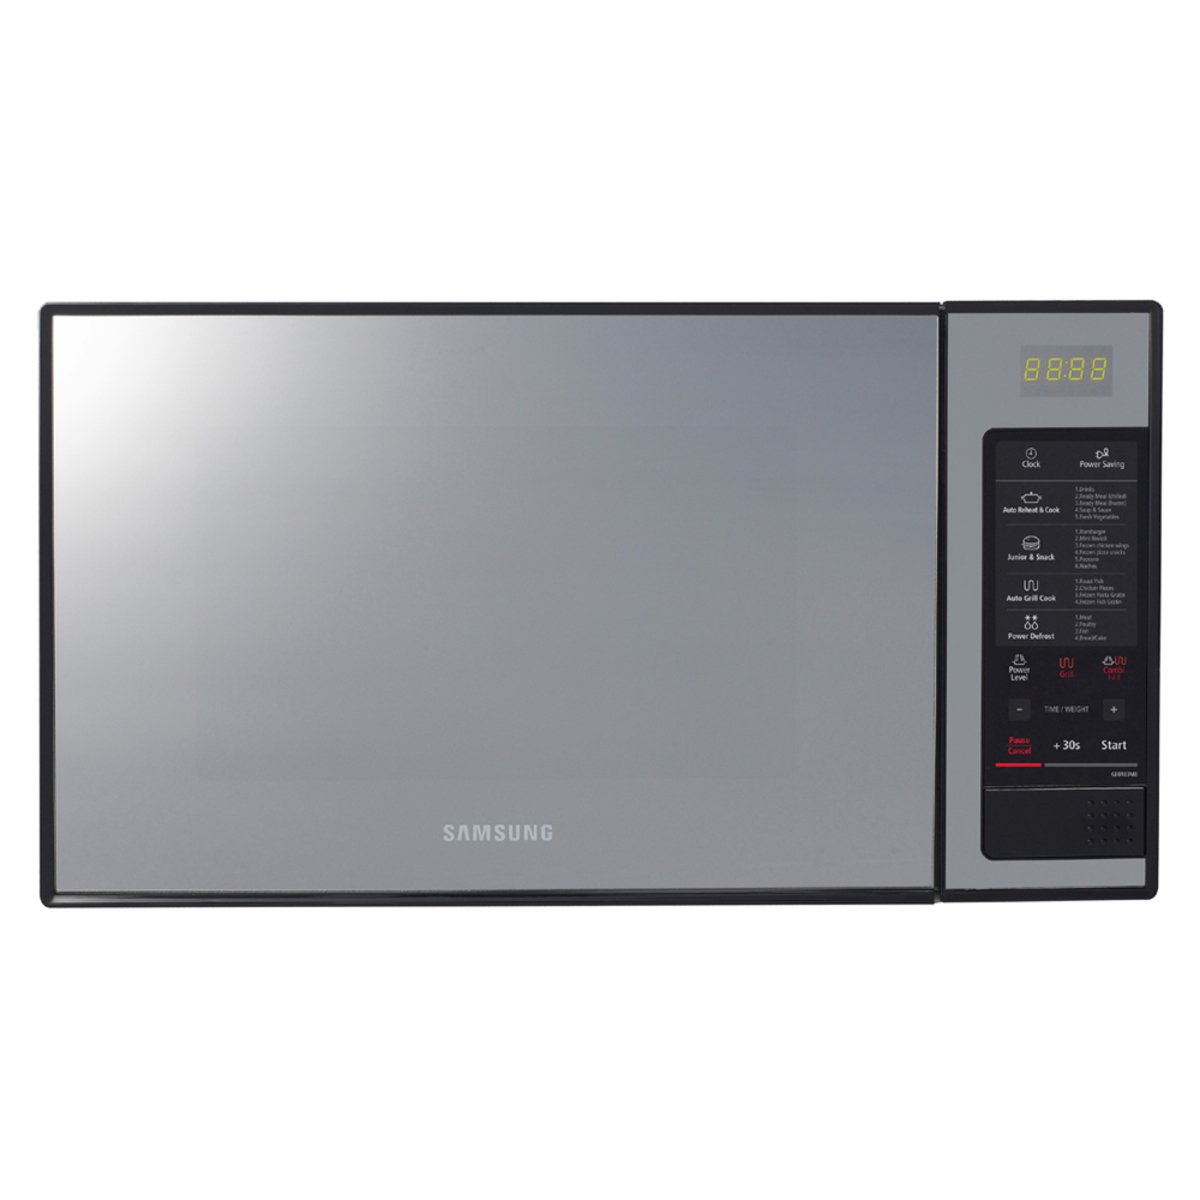 Samsung Microwave Oven with Grill GE0103MB 28 Ltr